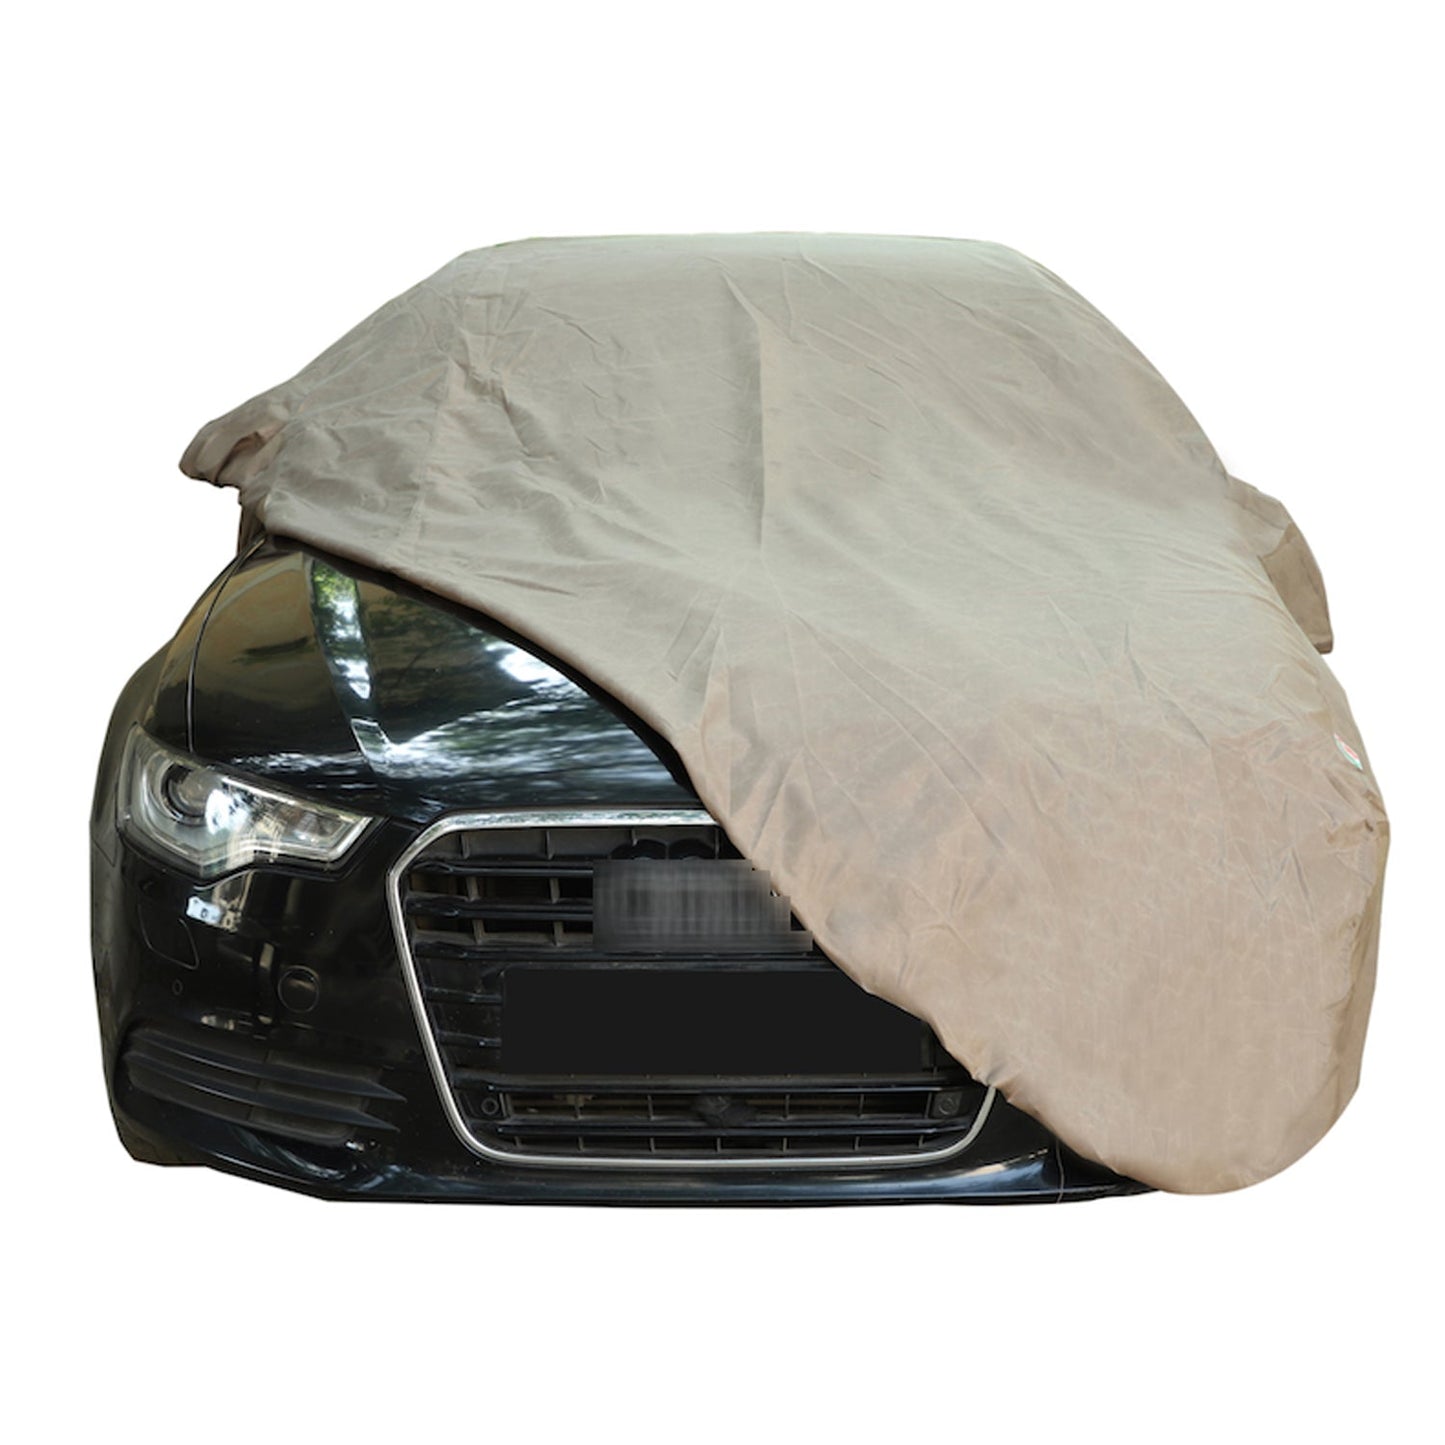 Oshotto Brown 100% Waterproof Car Body Cover with Mirror Pockets For Renault Pulse